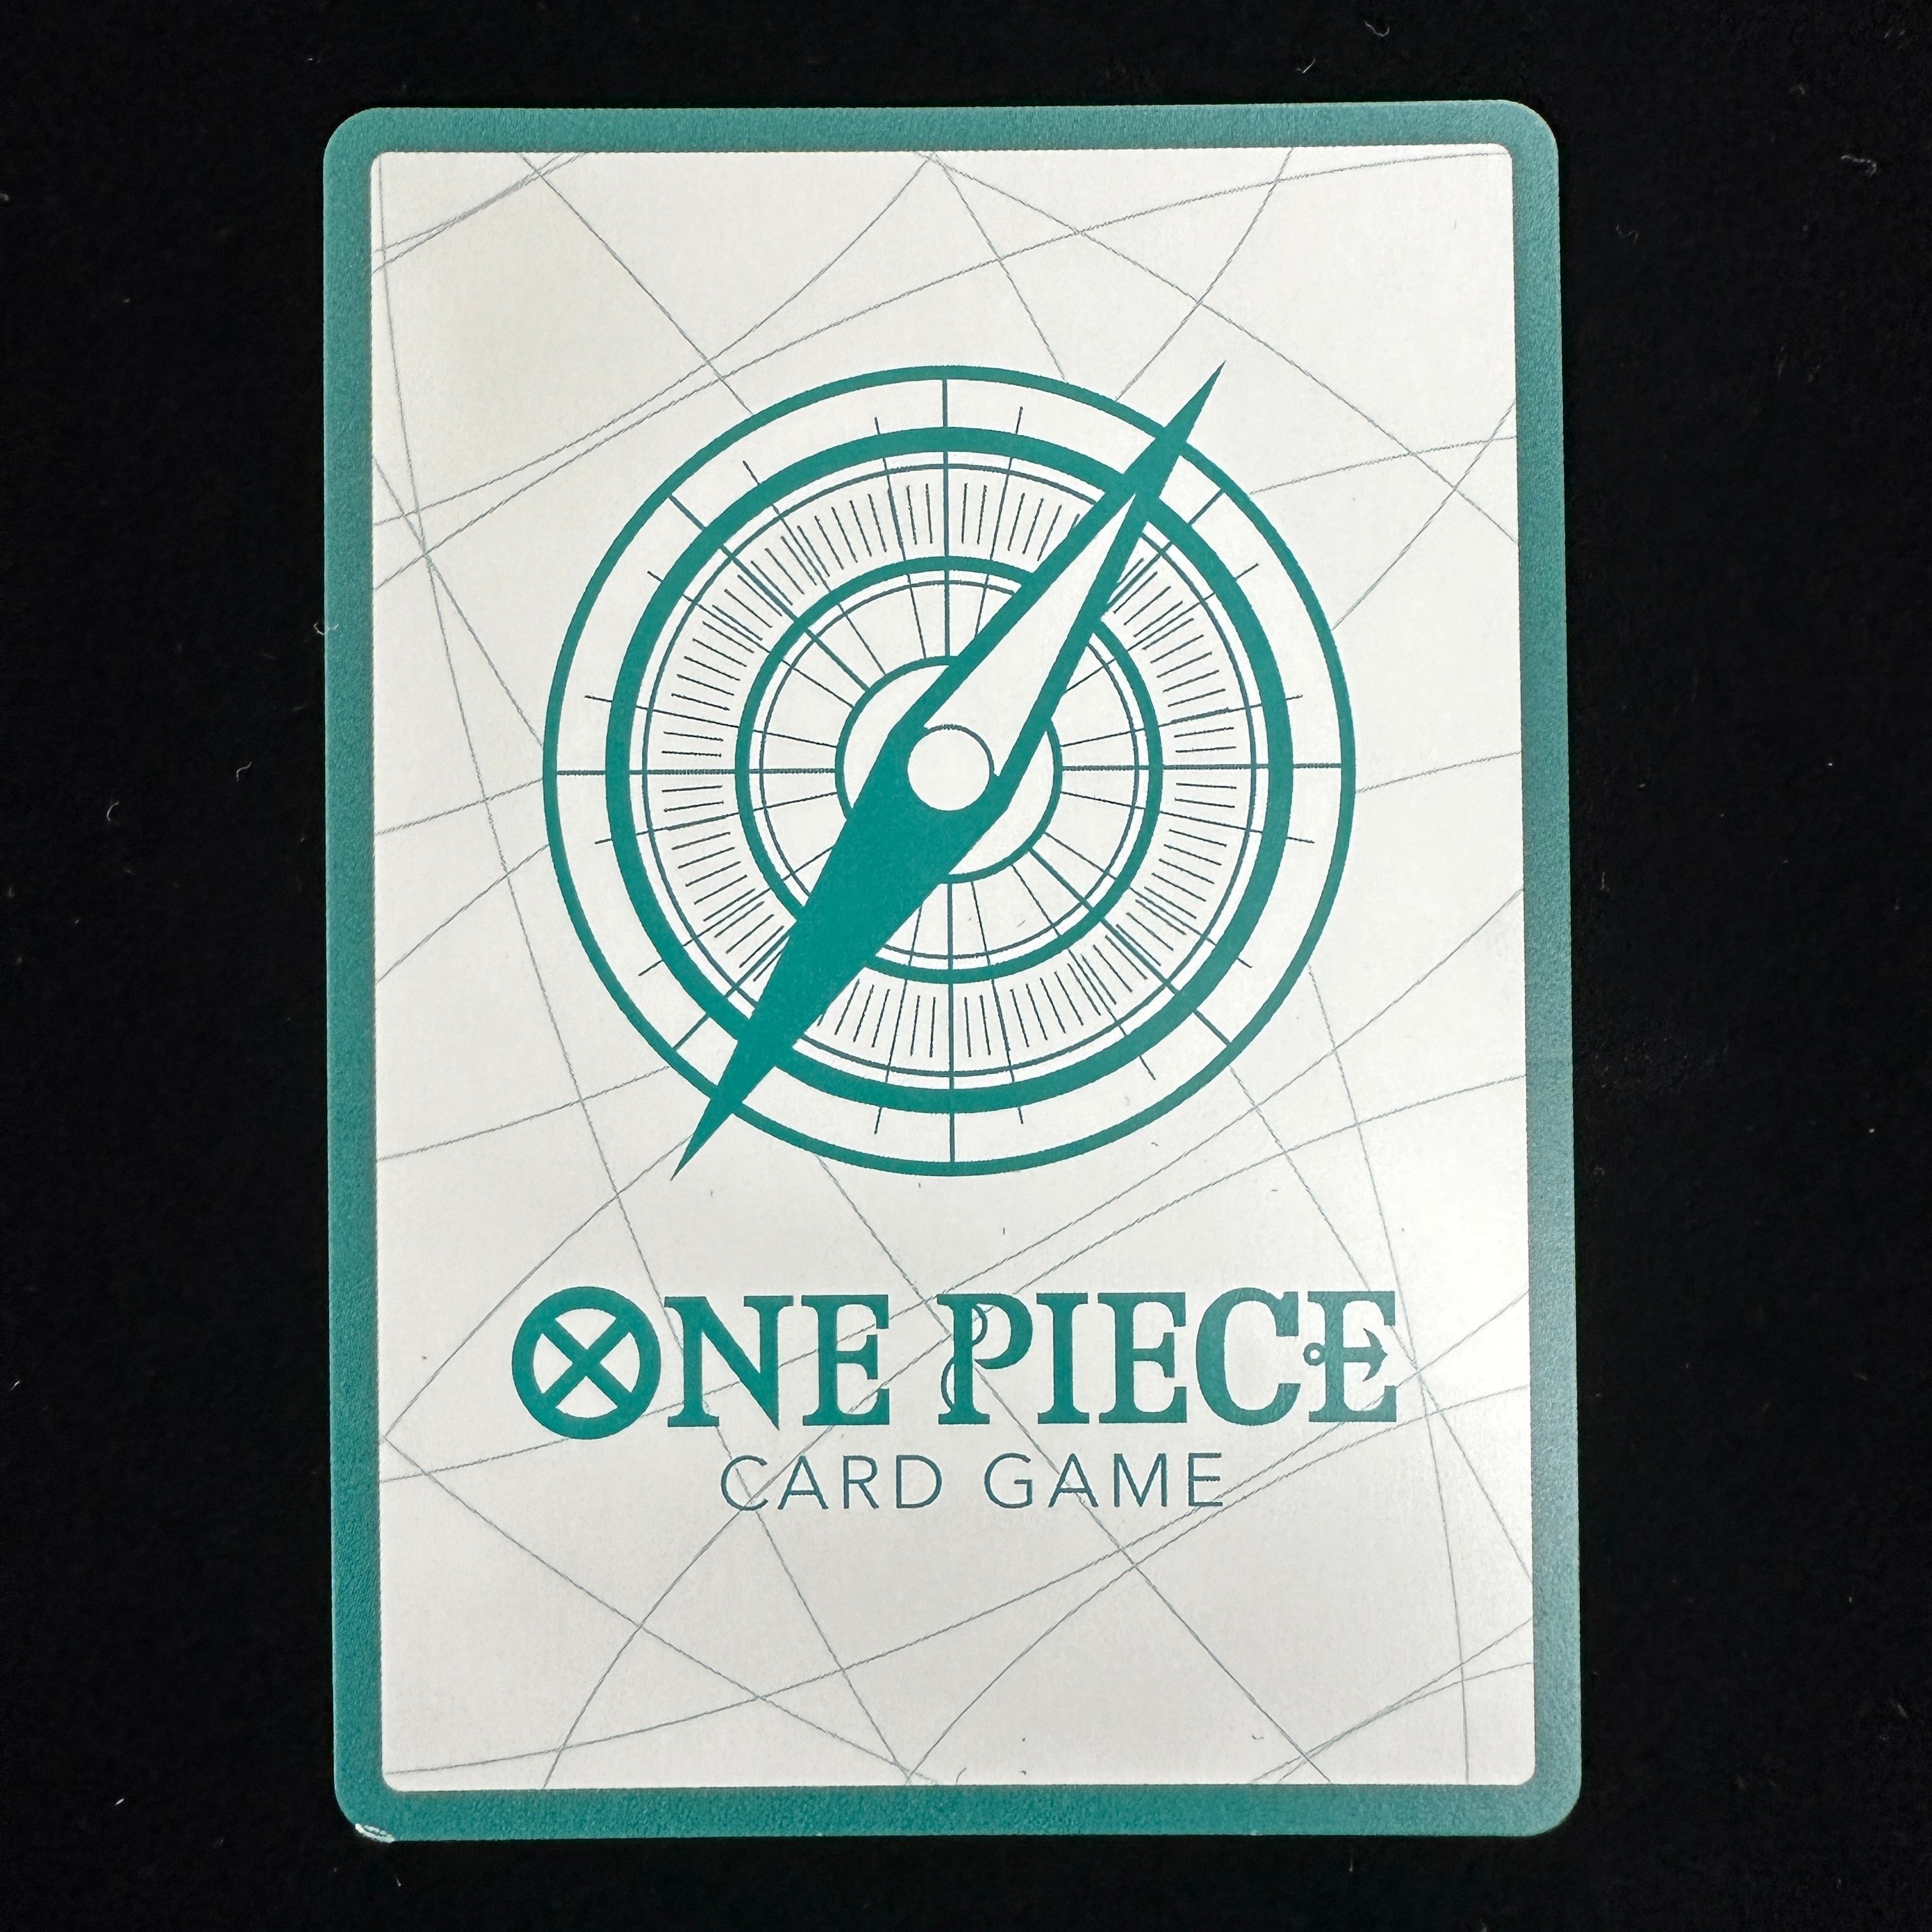 ONE PIECE CARD GAME DON!! Card Gear 5